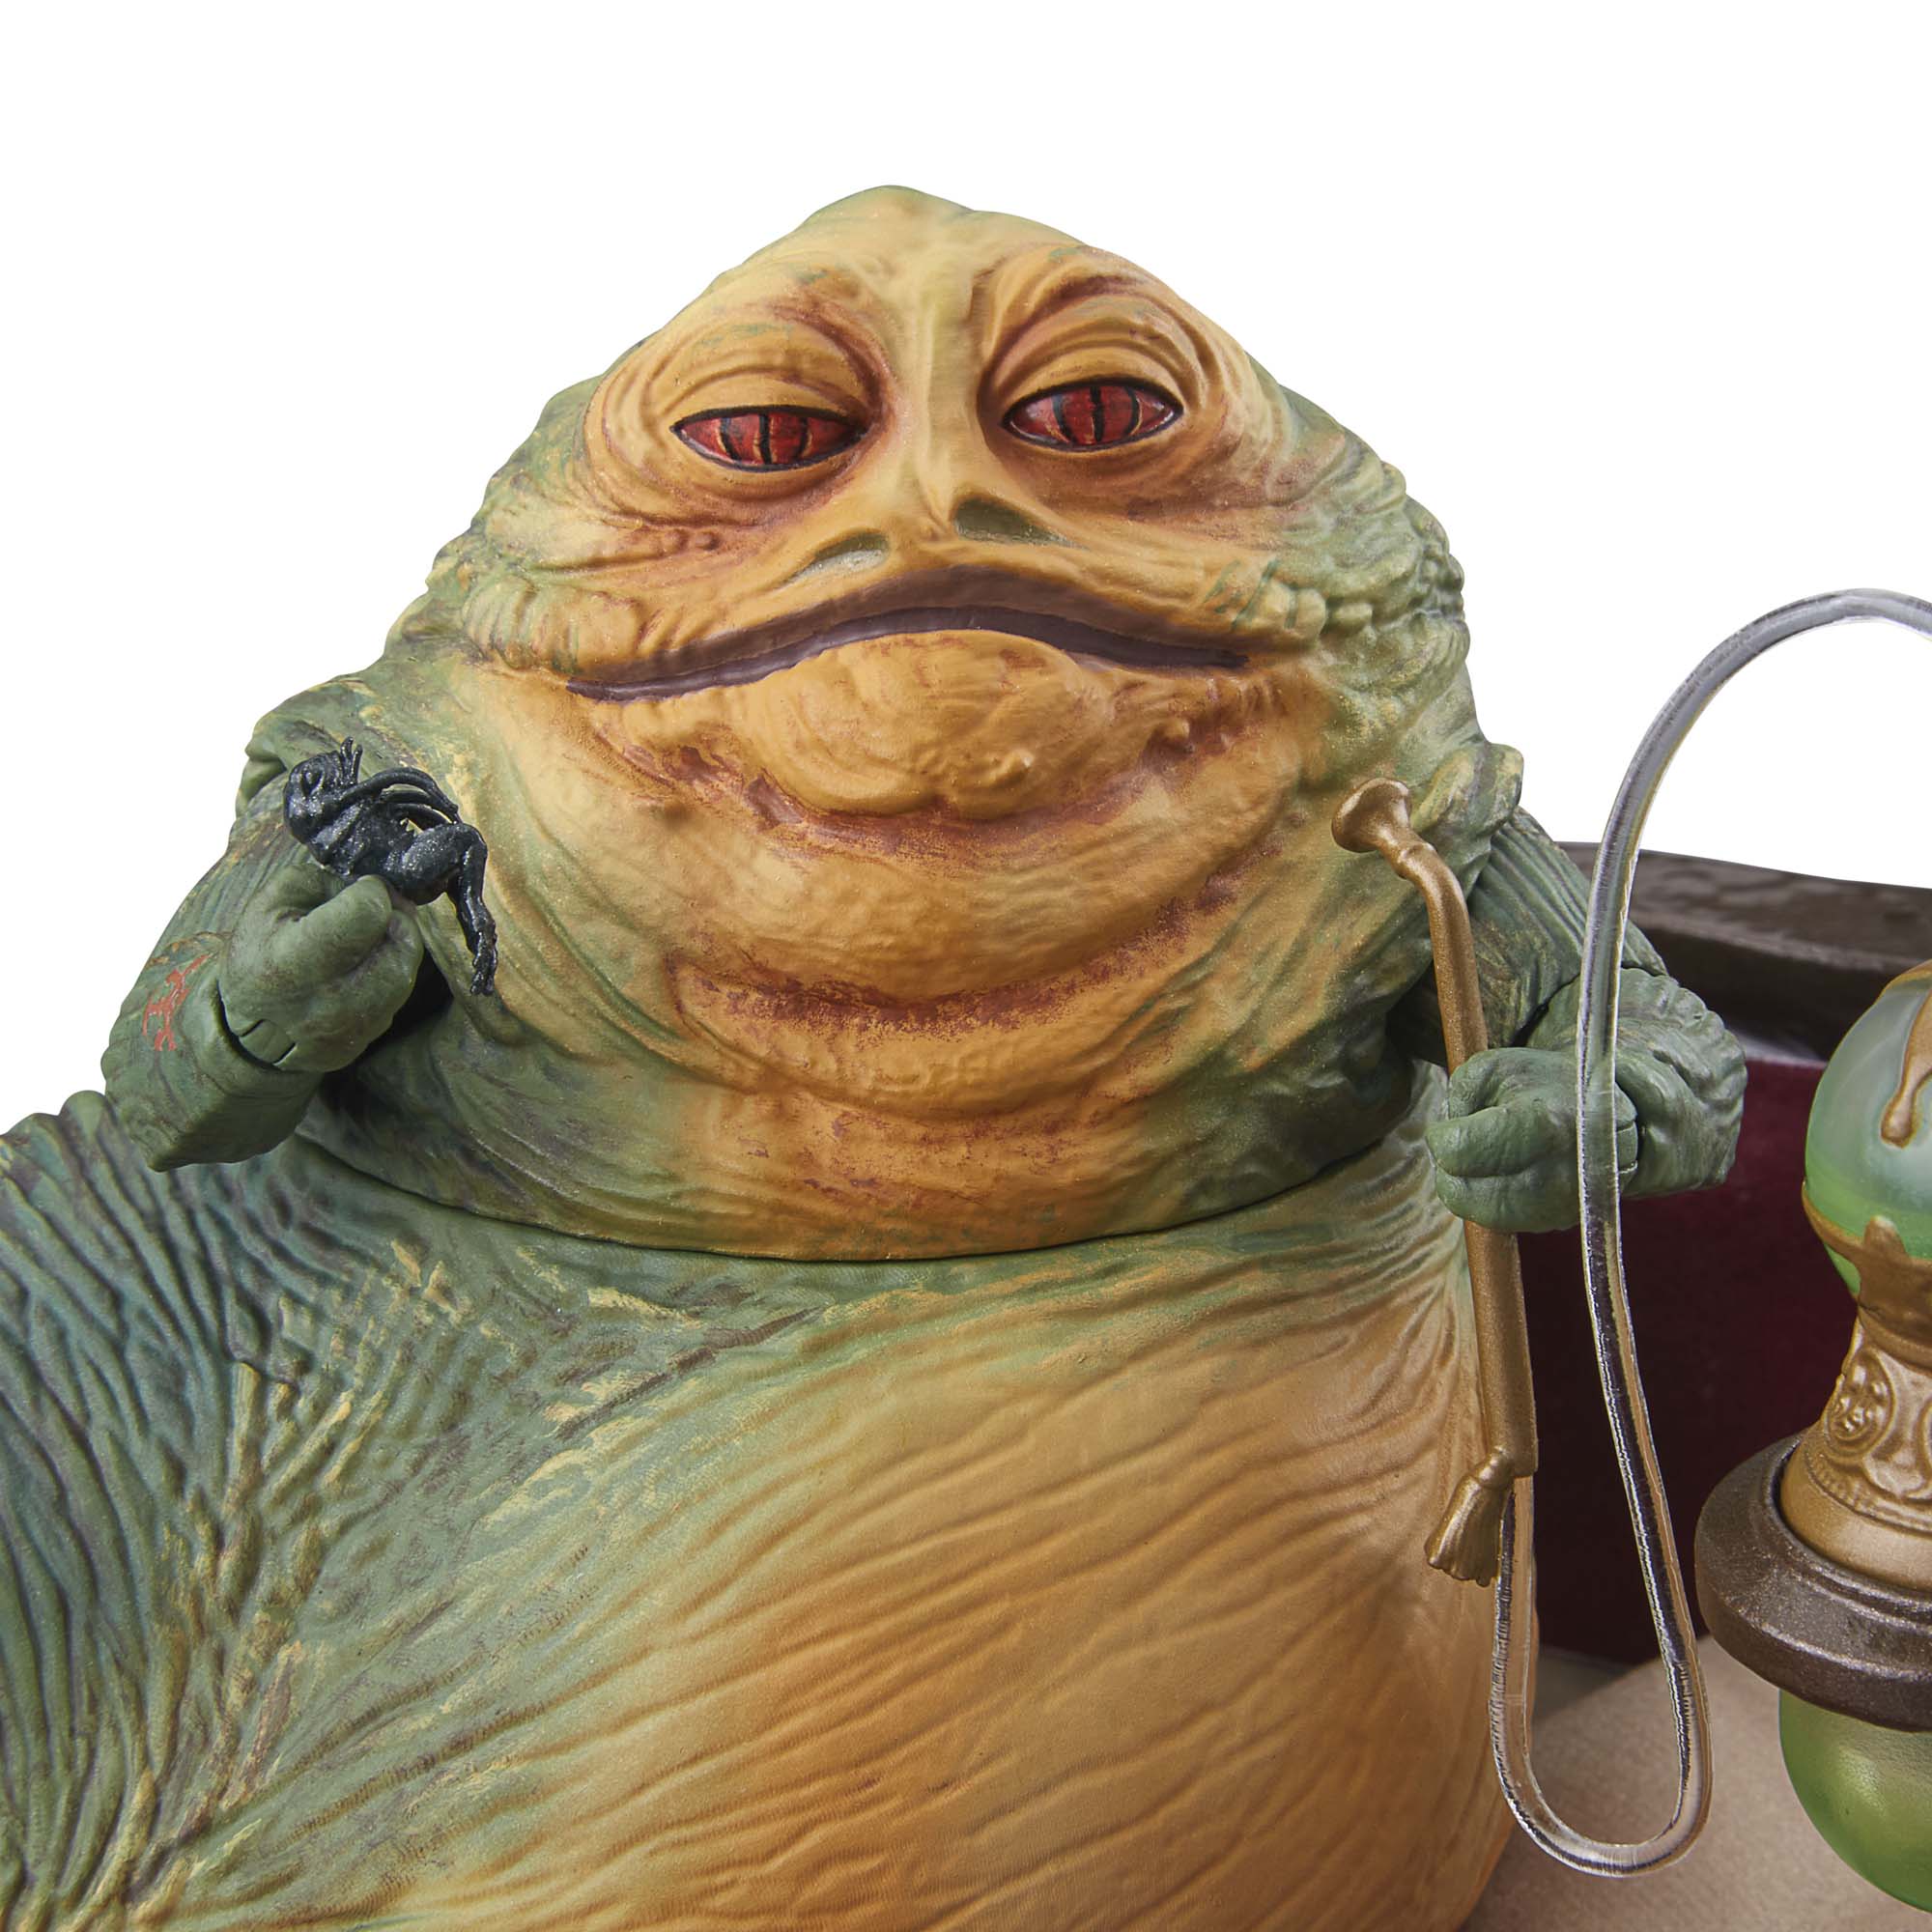 Hasbro - Star Wars: The Vintage Collection - Return of the Jedi - Jabba the Hutt Set - Marvelous Toys